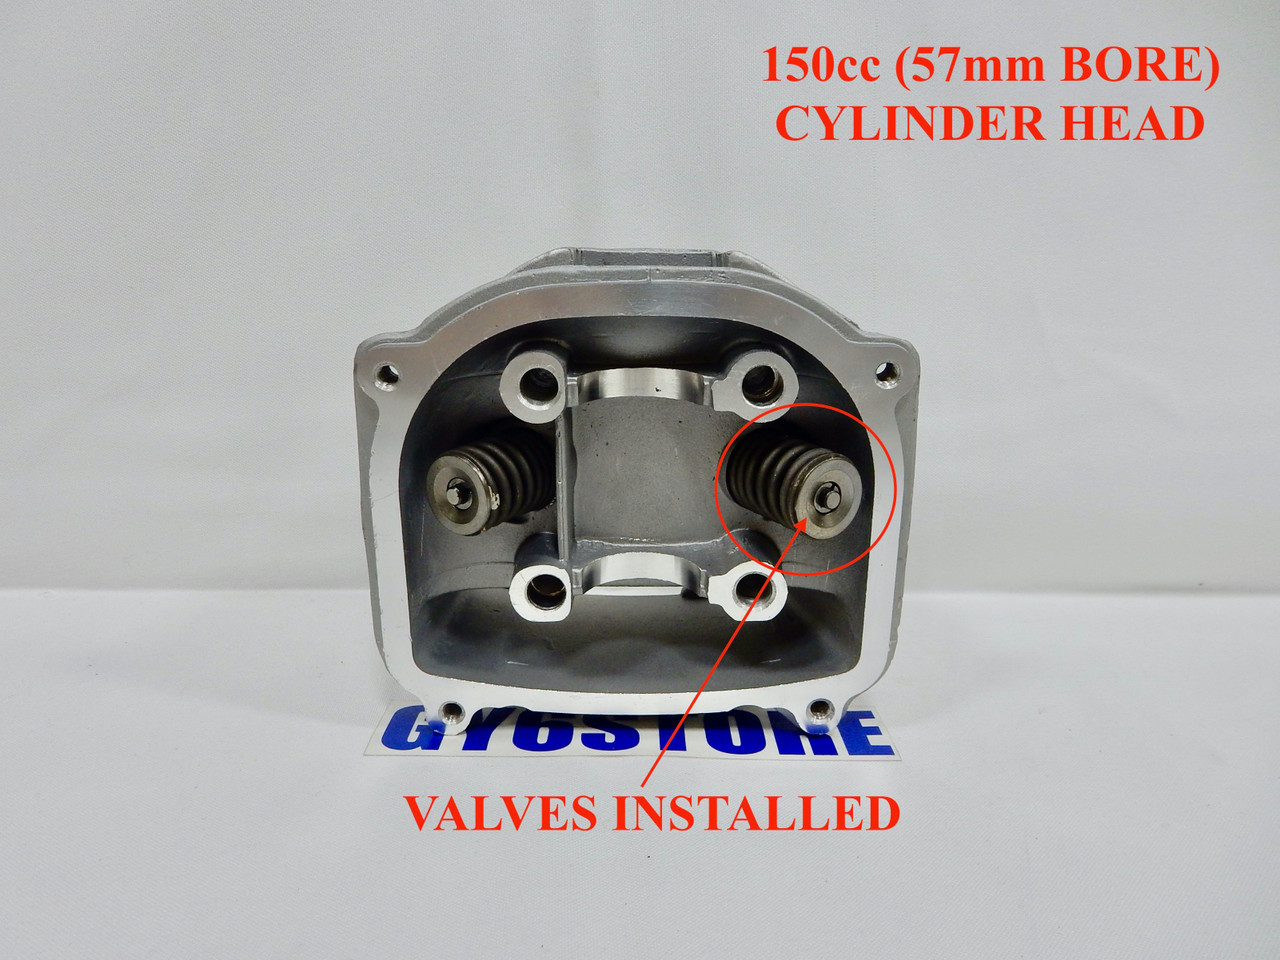 150cc (57mm BORE) CYLINDER HEAD *WITH VALVES INSTALLED* FOR GY6 MOTORS